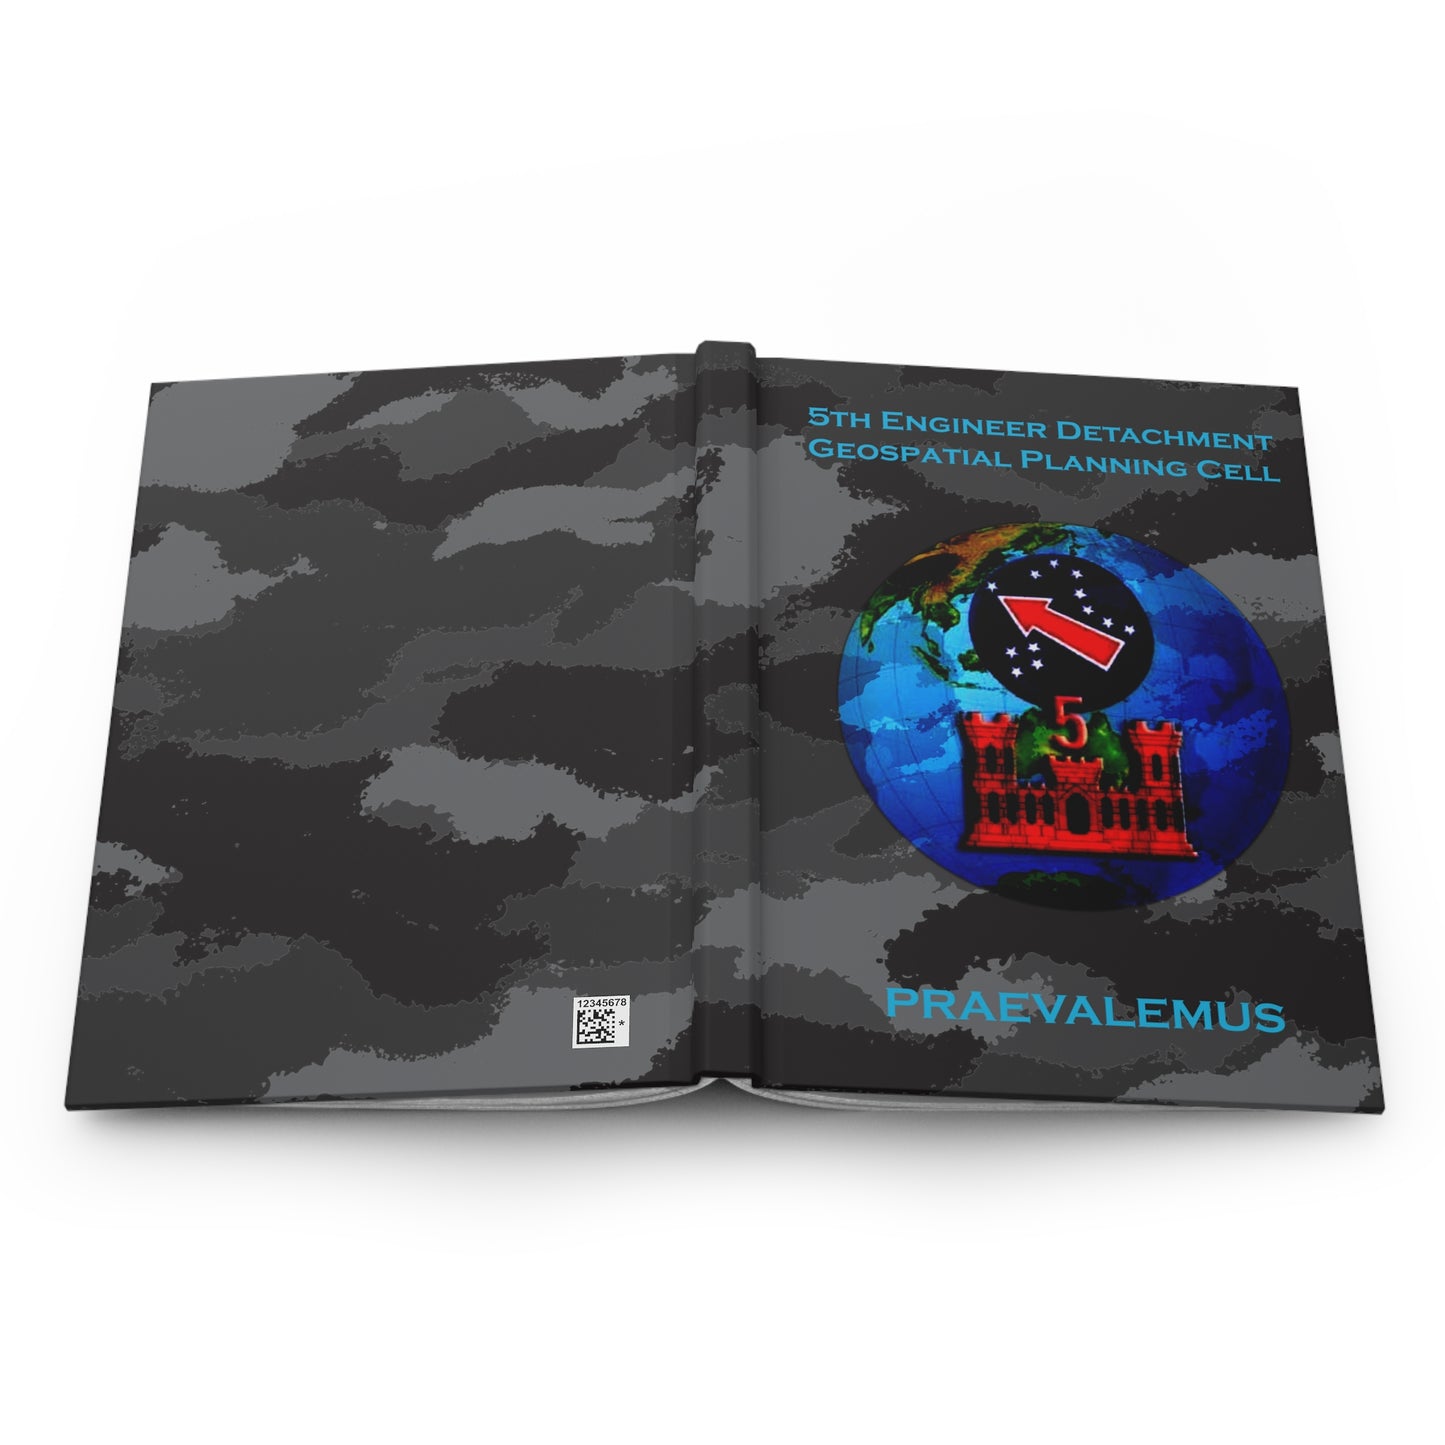 5th Engineer Detachment Geospatial Planning Cell Translucent Concealed Camo Hardcover Leader Book